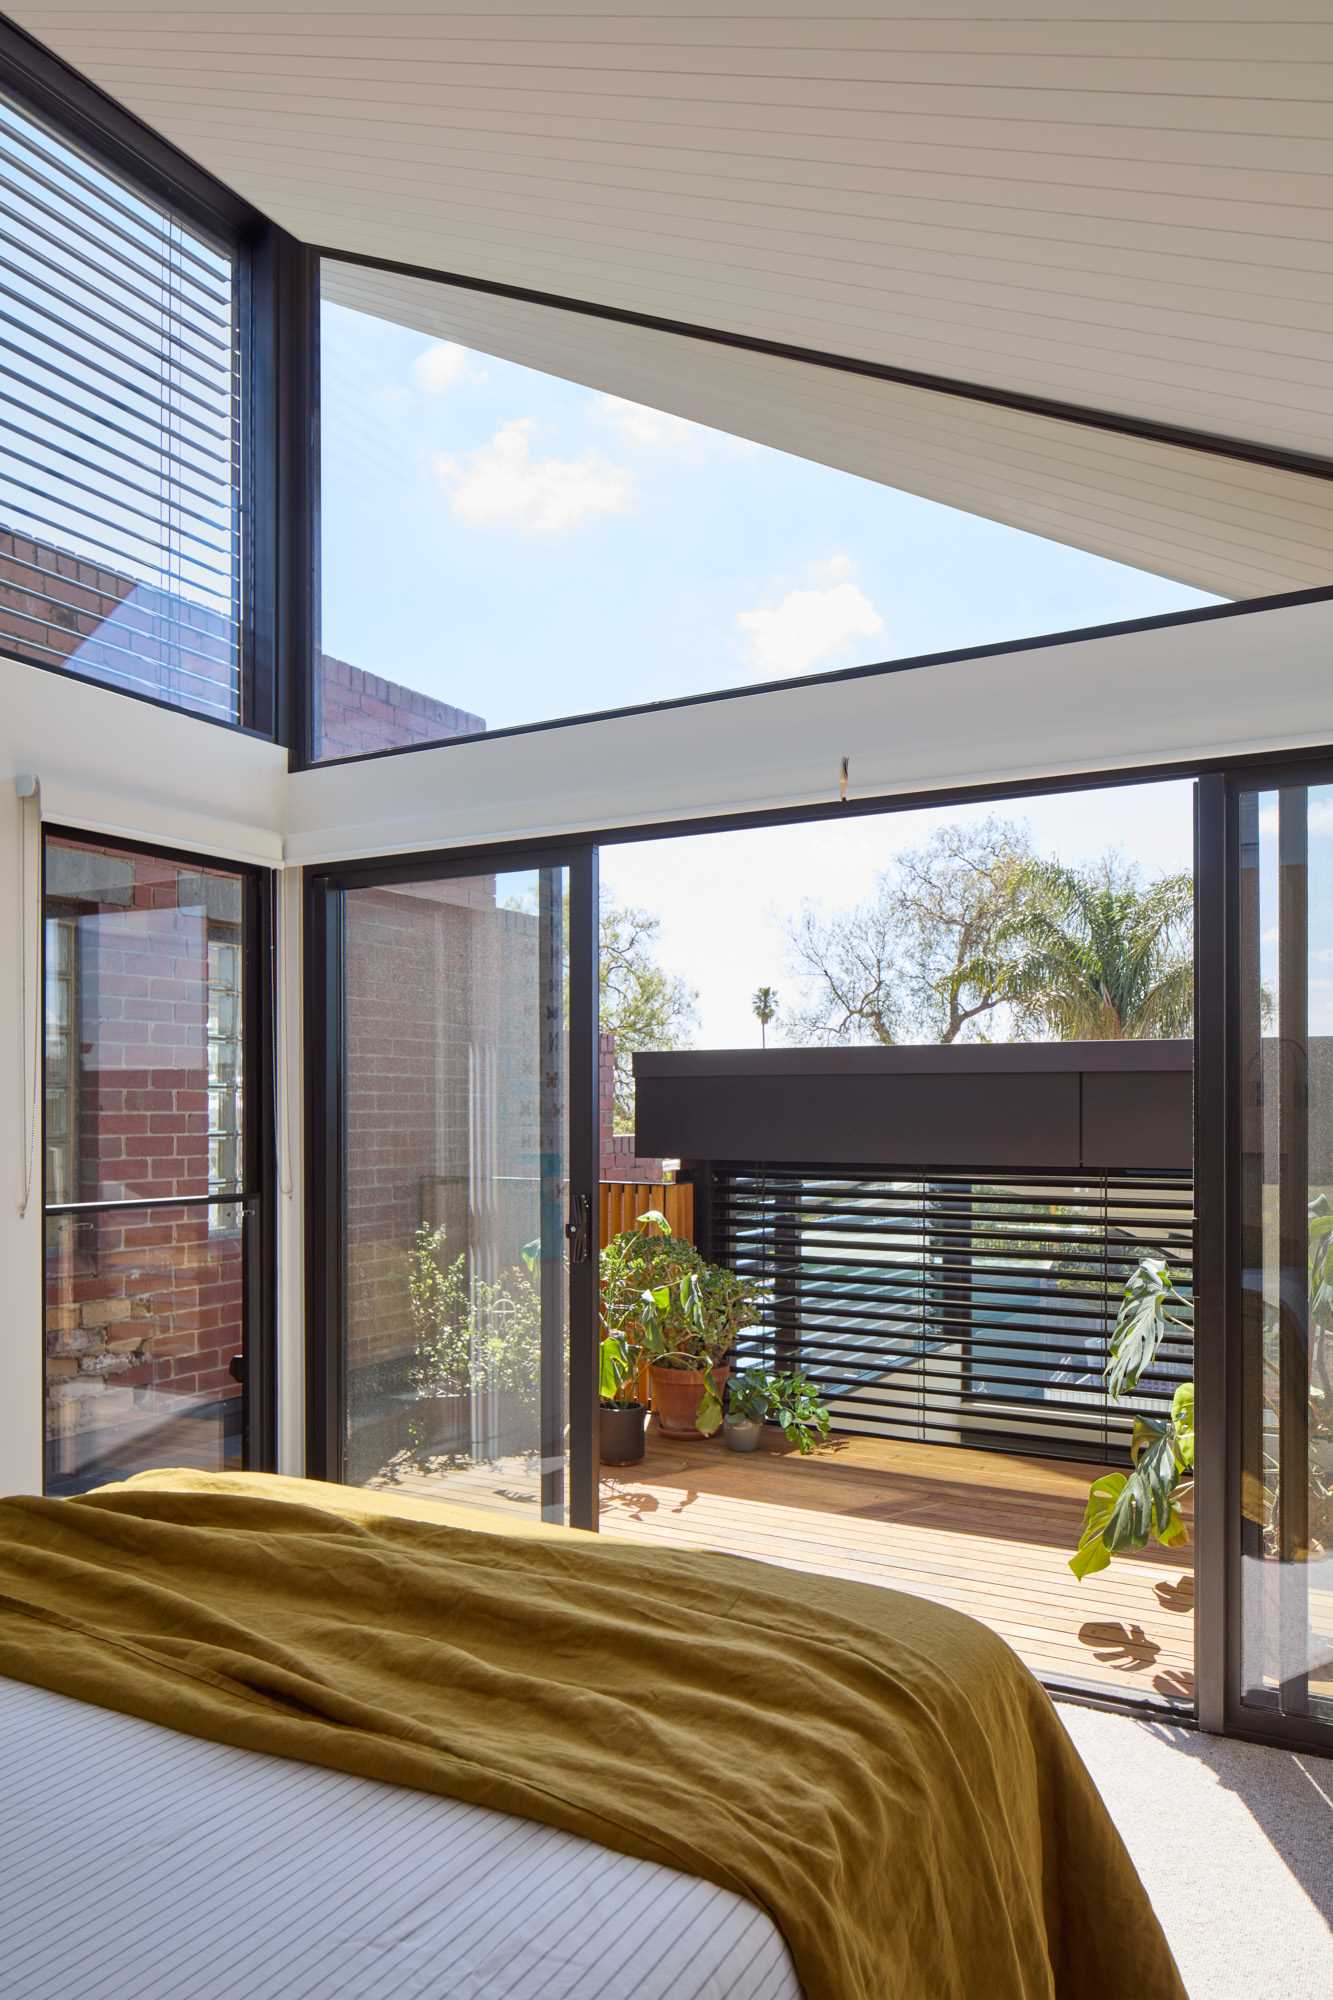 A modern bedroom with sliding glass doors that open to a private balcony with a variety of plants.